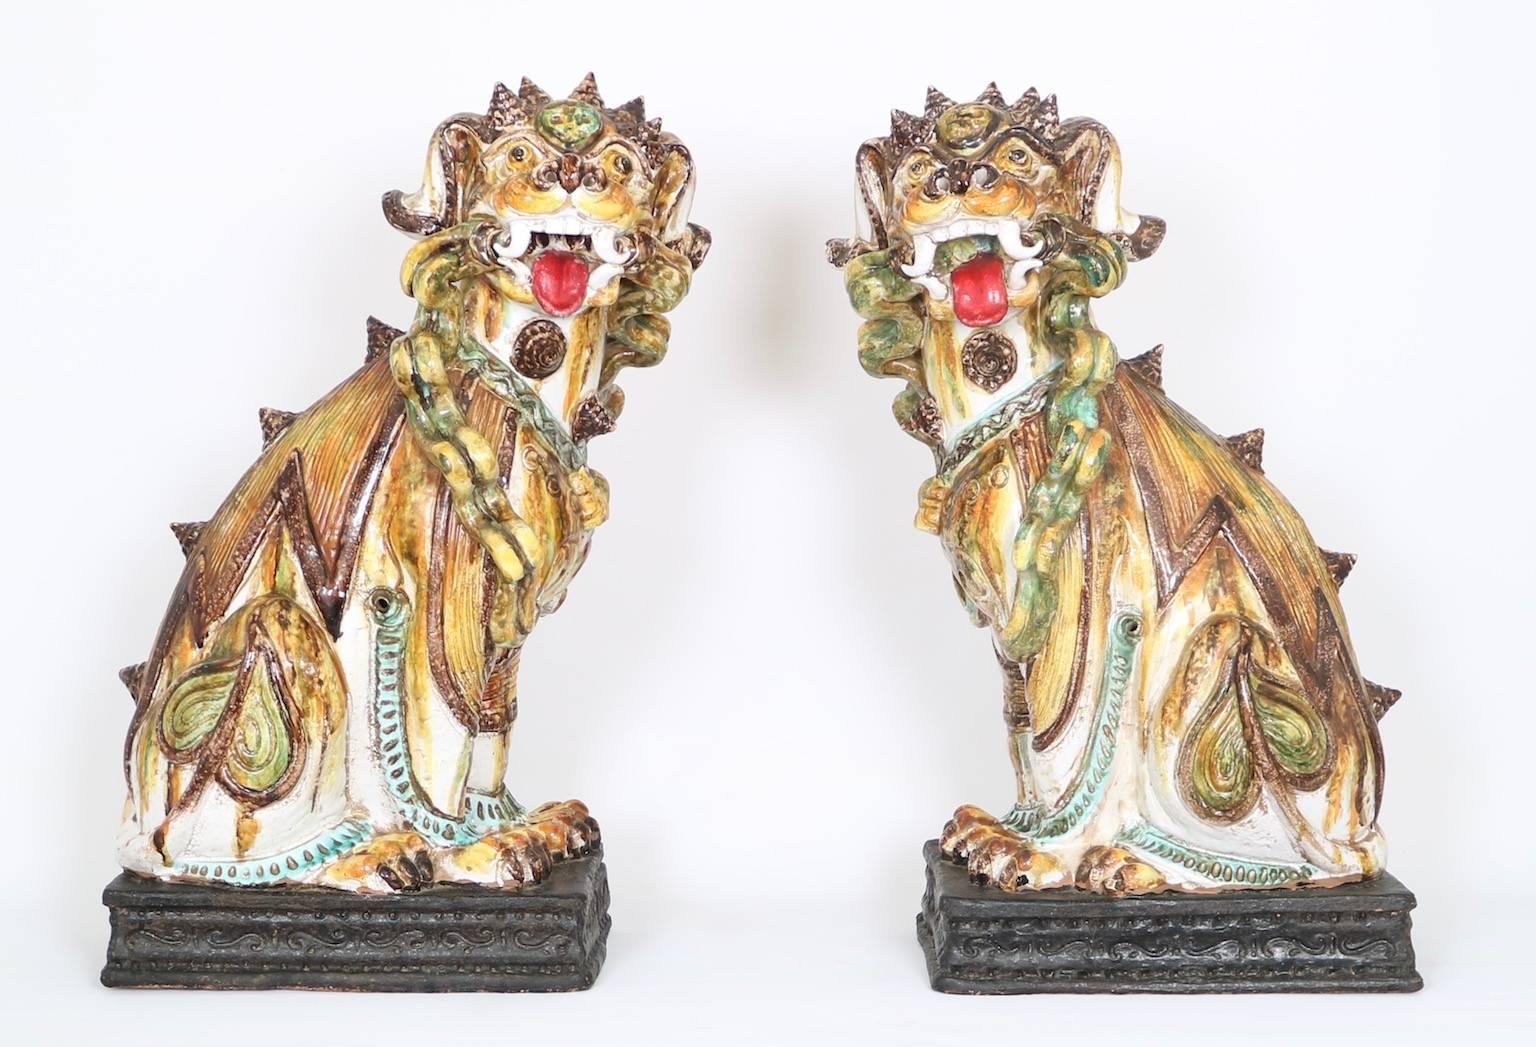 A pair of large terracotta Majolica foo dogs, produced in Italy during the Hollywood Regency era circa 1950s. The pair has multicolored glazes and is an excellent Mid-Century Modern era Italian interpretation of the Chinese models. In excellent